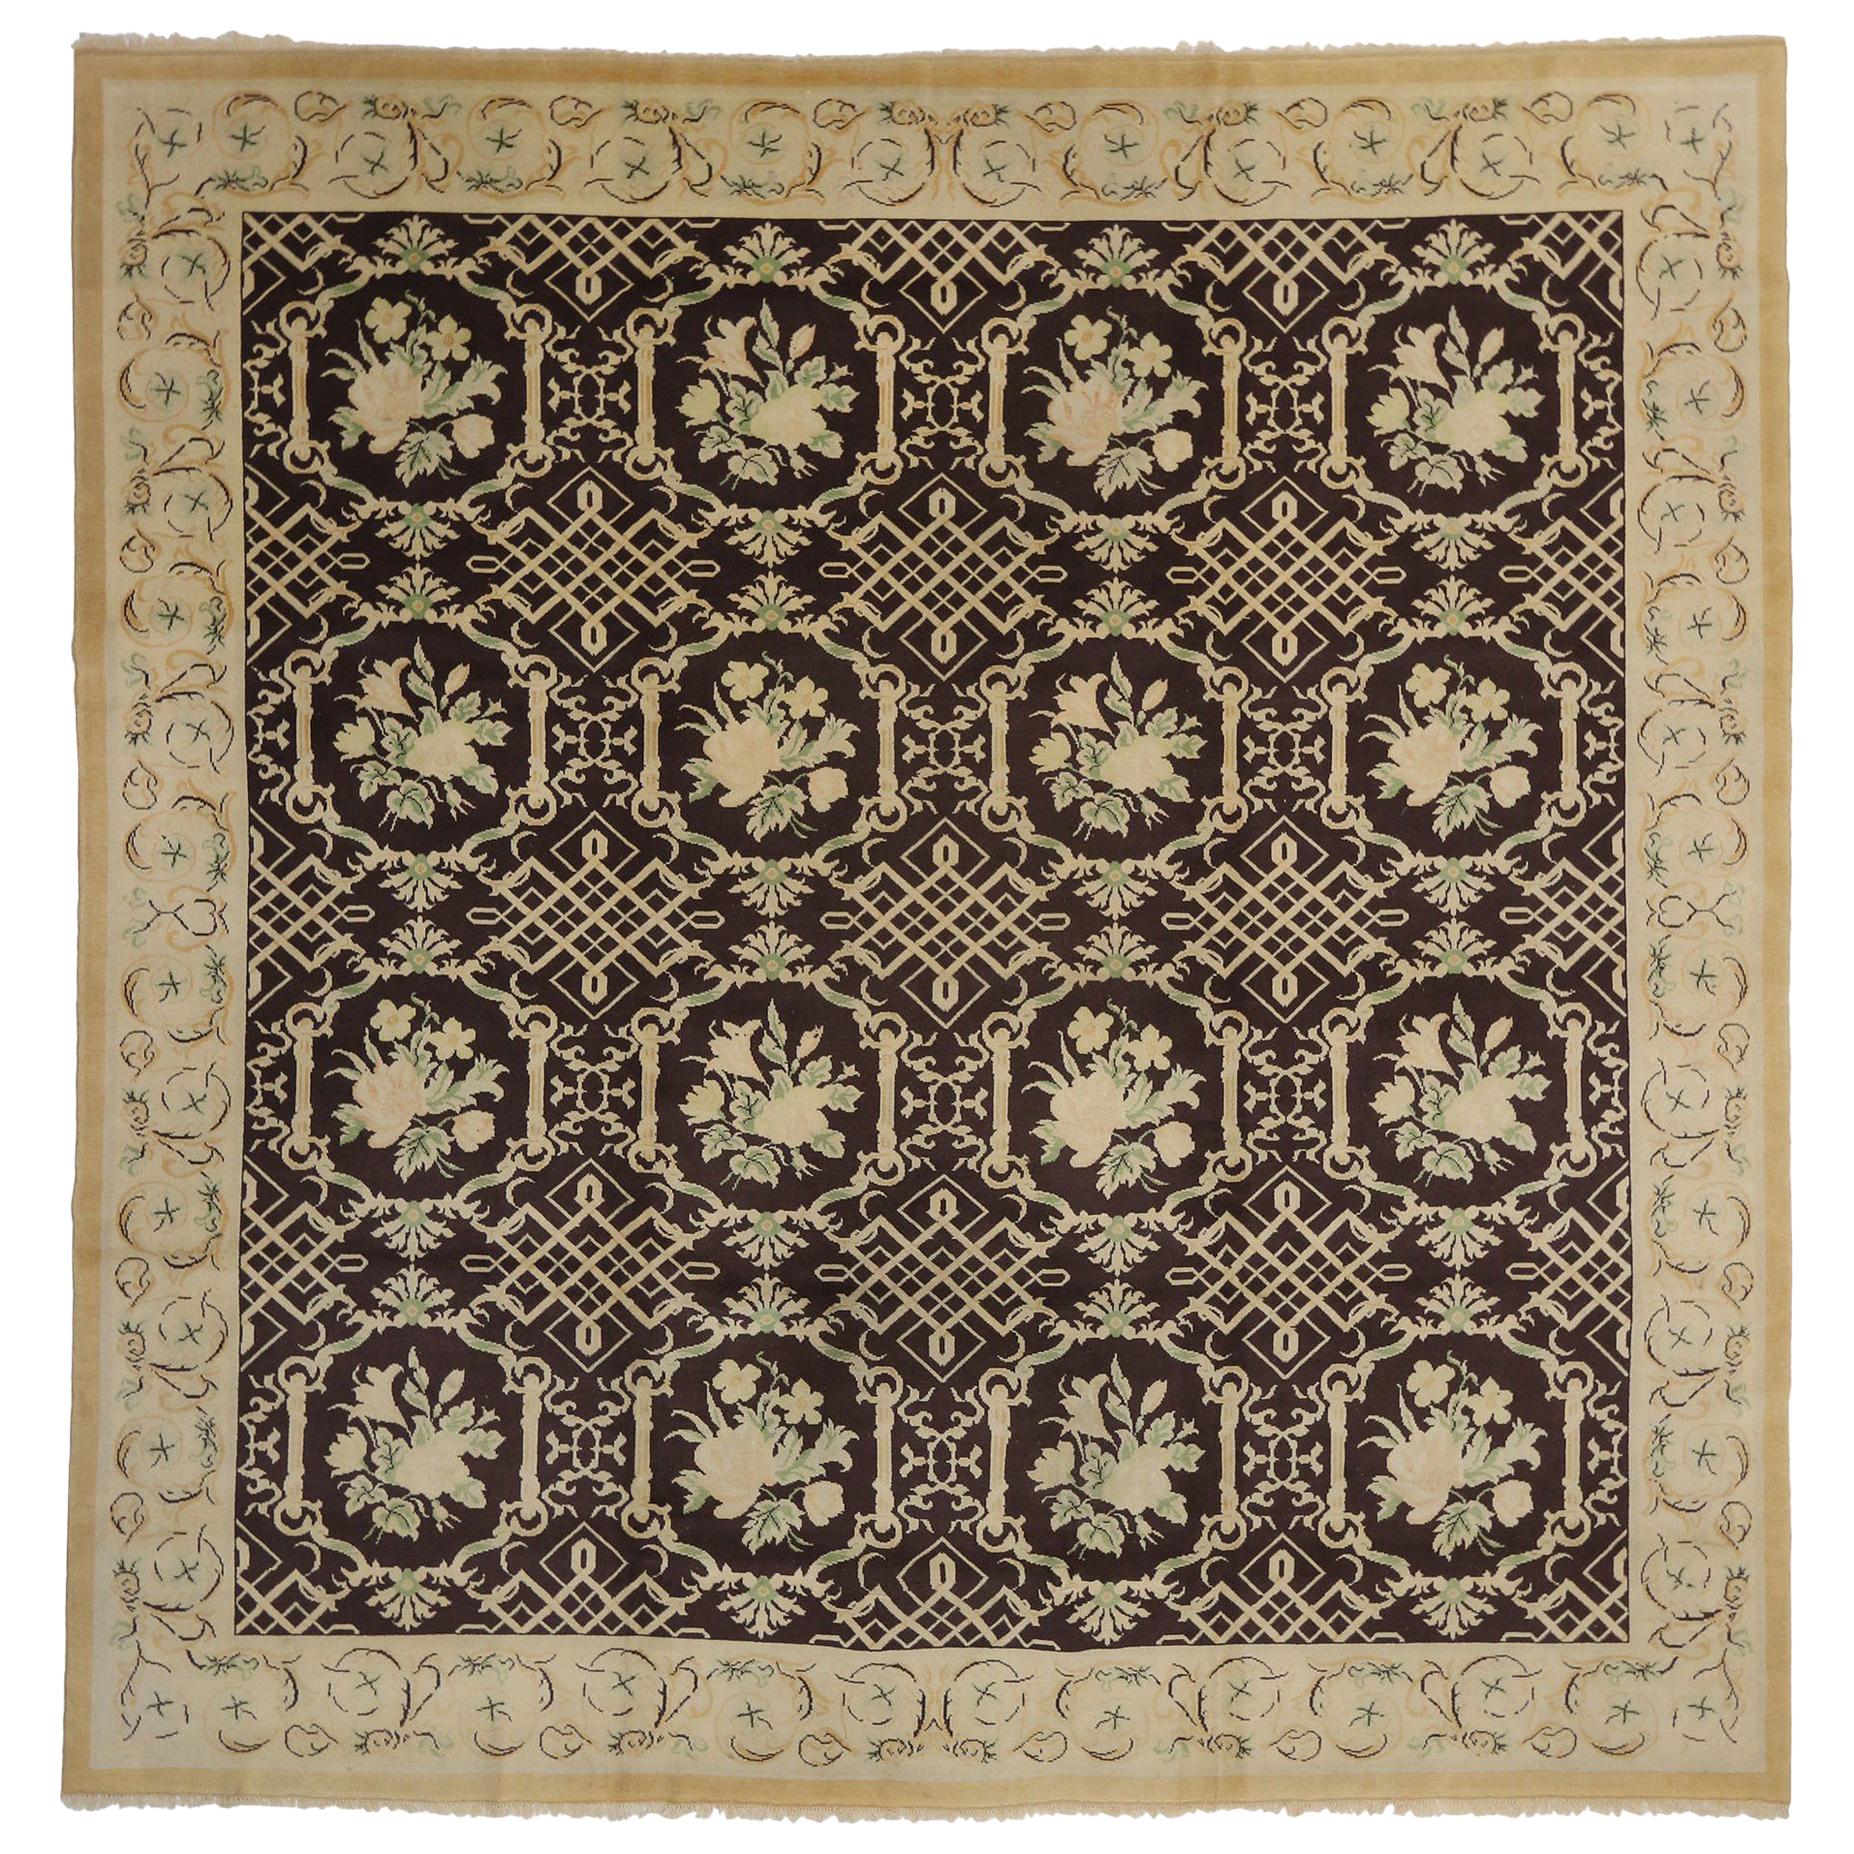 Vintage European Garden Rug with Renaissance Style, Square Area Rug For Sale